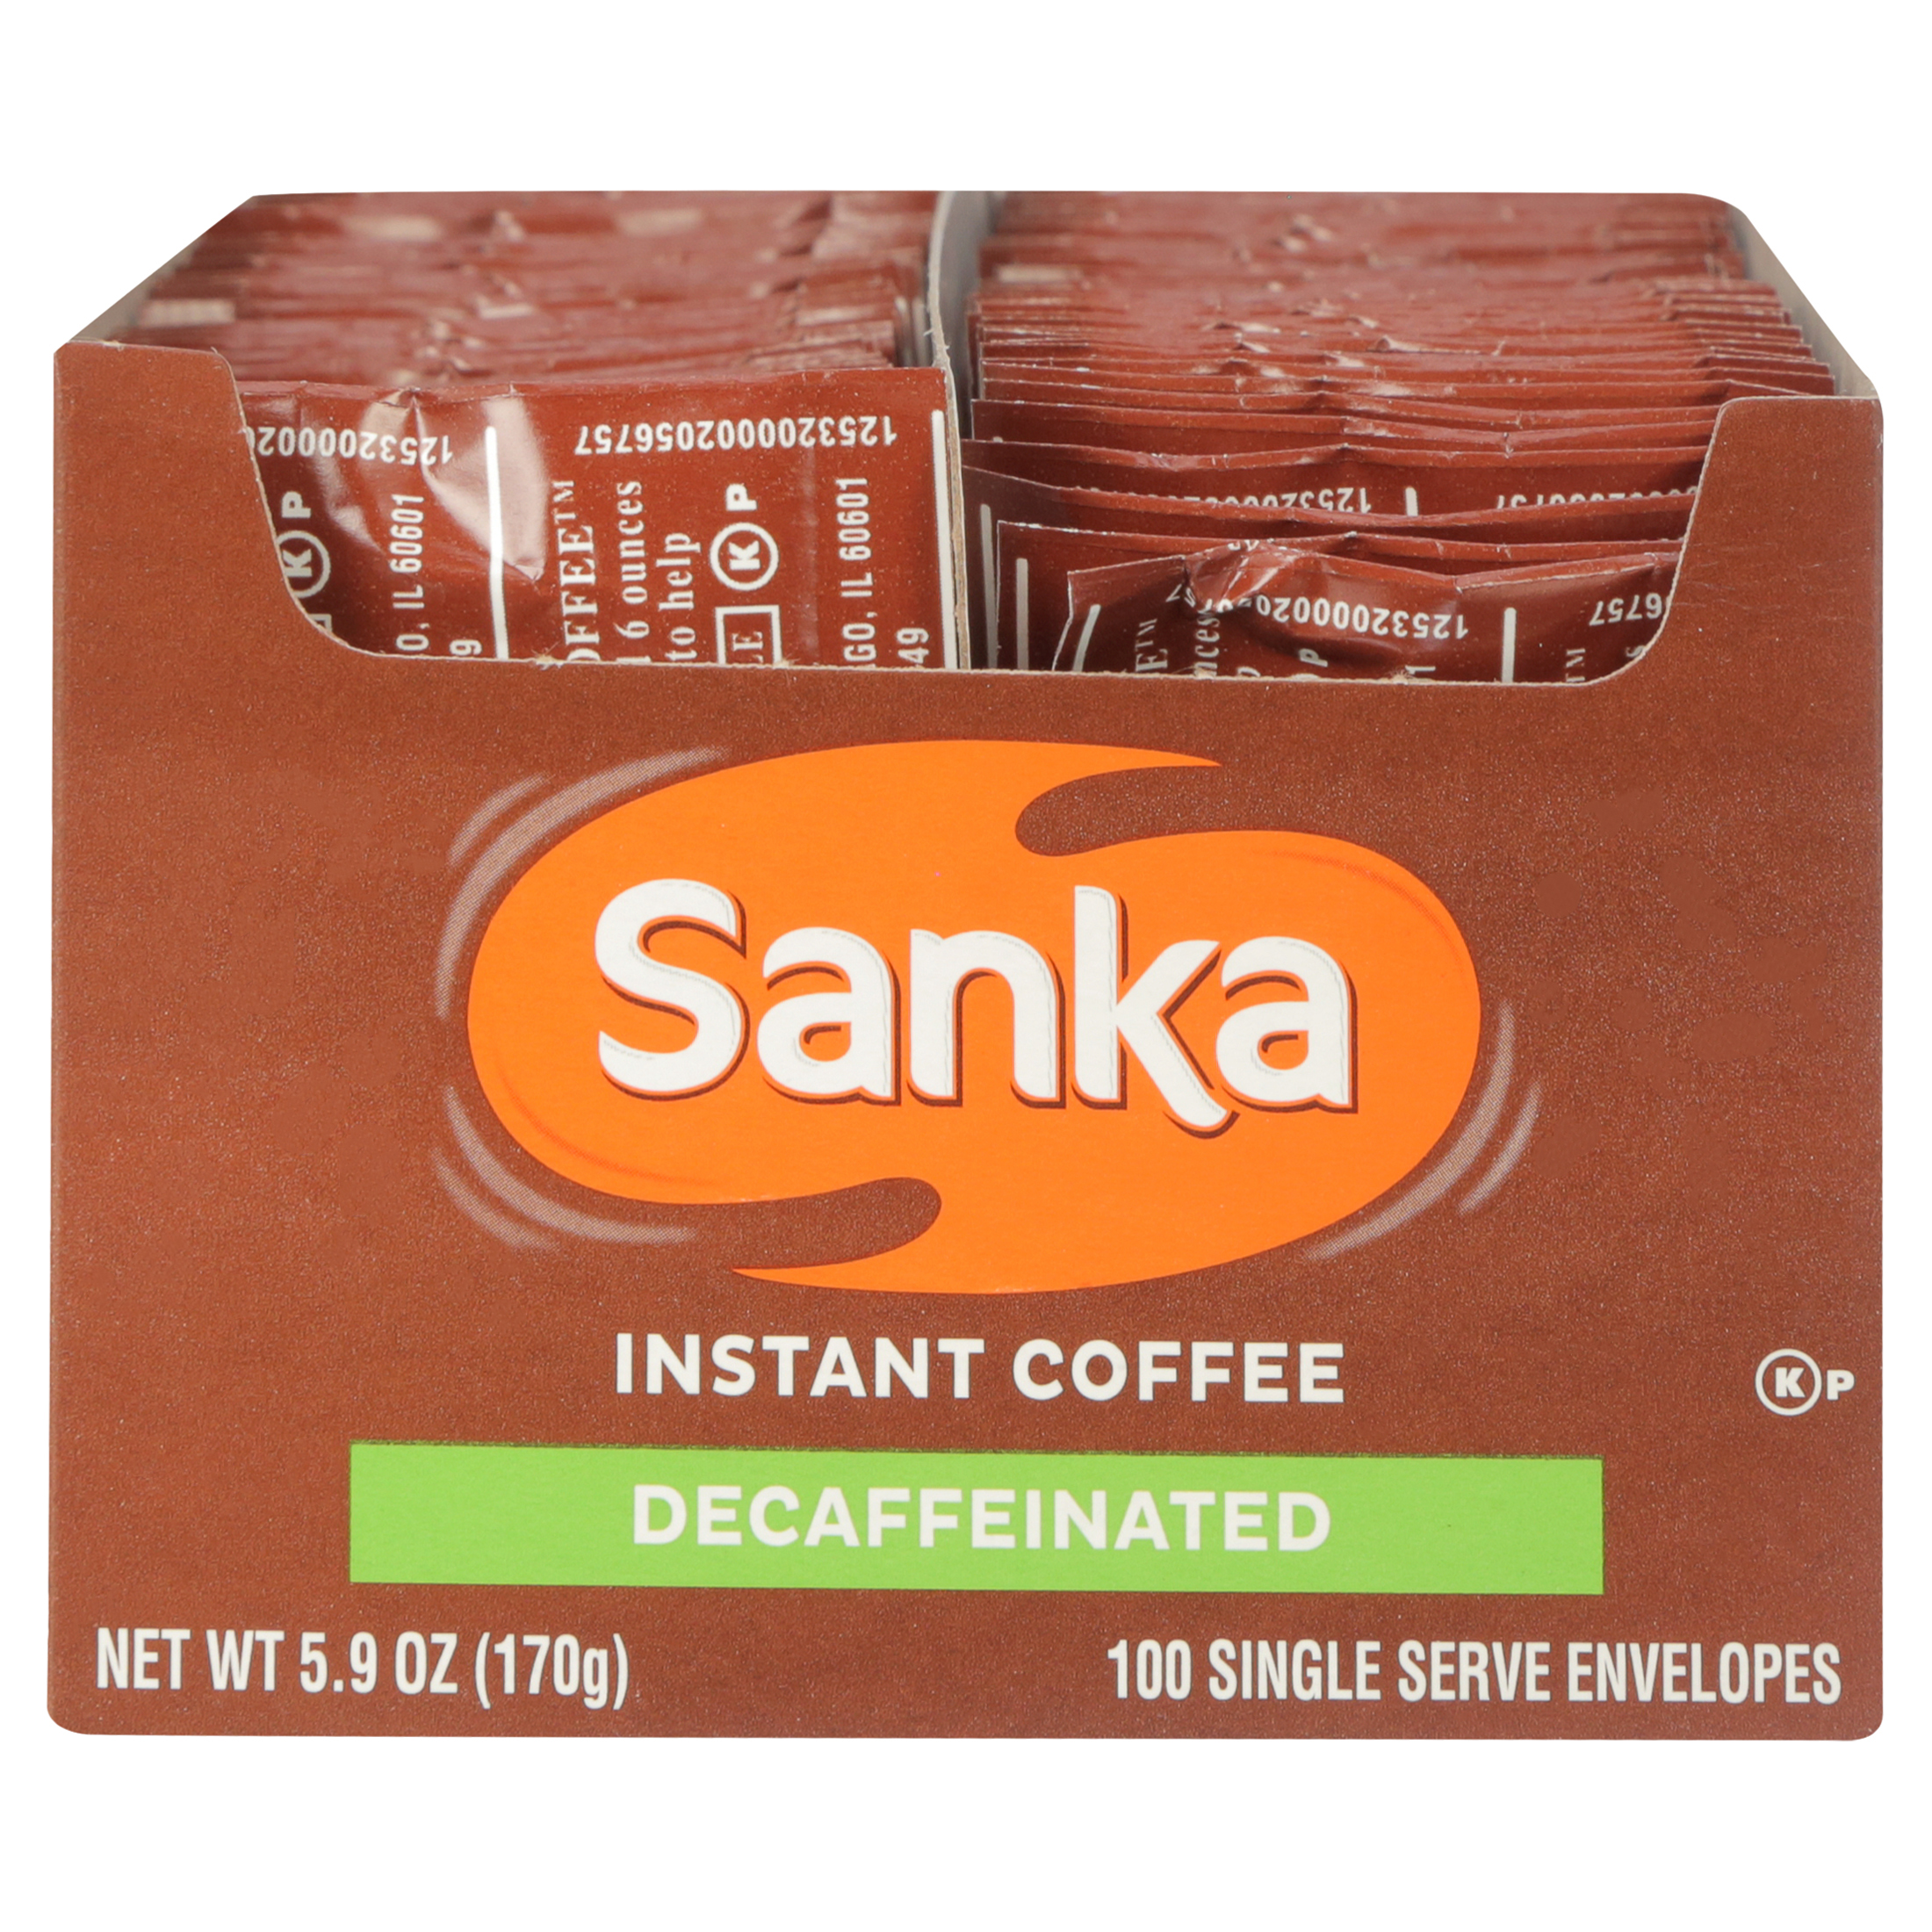 Sanka Decaf Instant Coffee Single Serve Packets, 100 ct Box - image 5 of 9